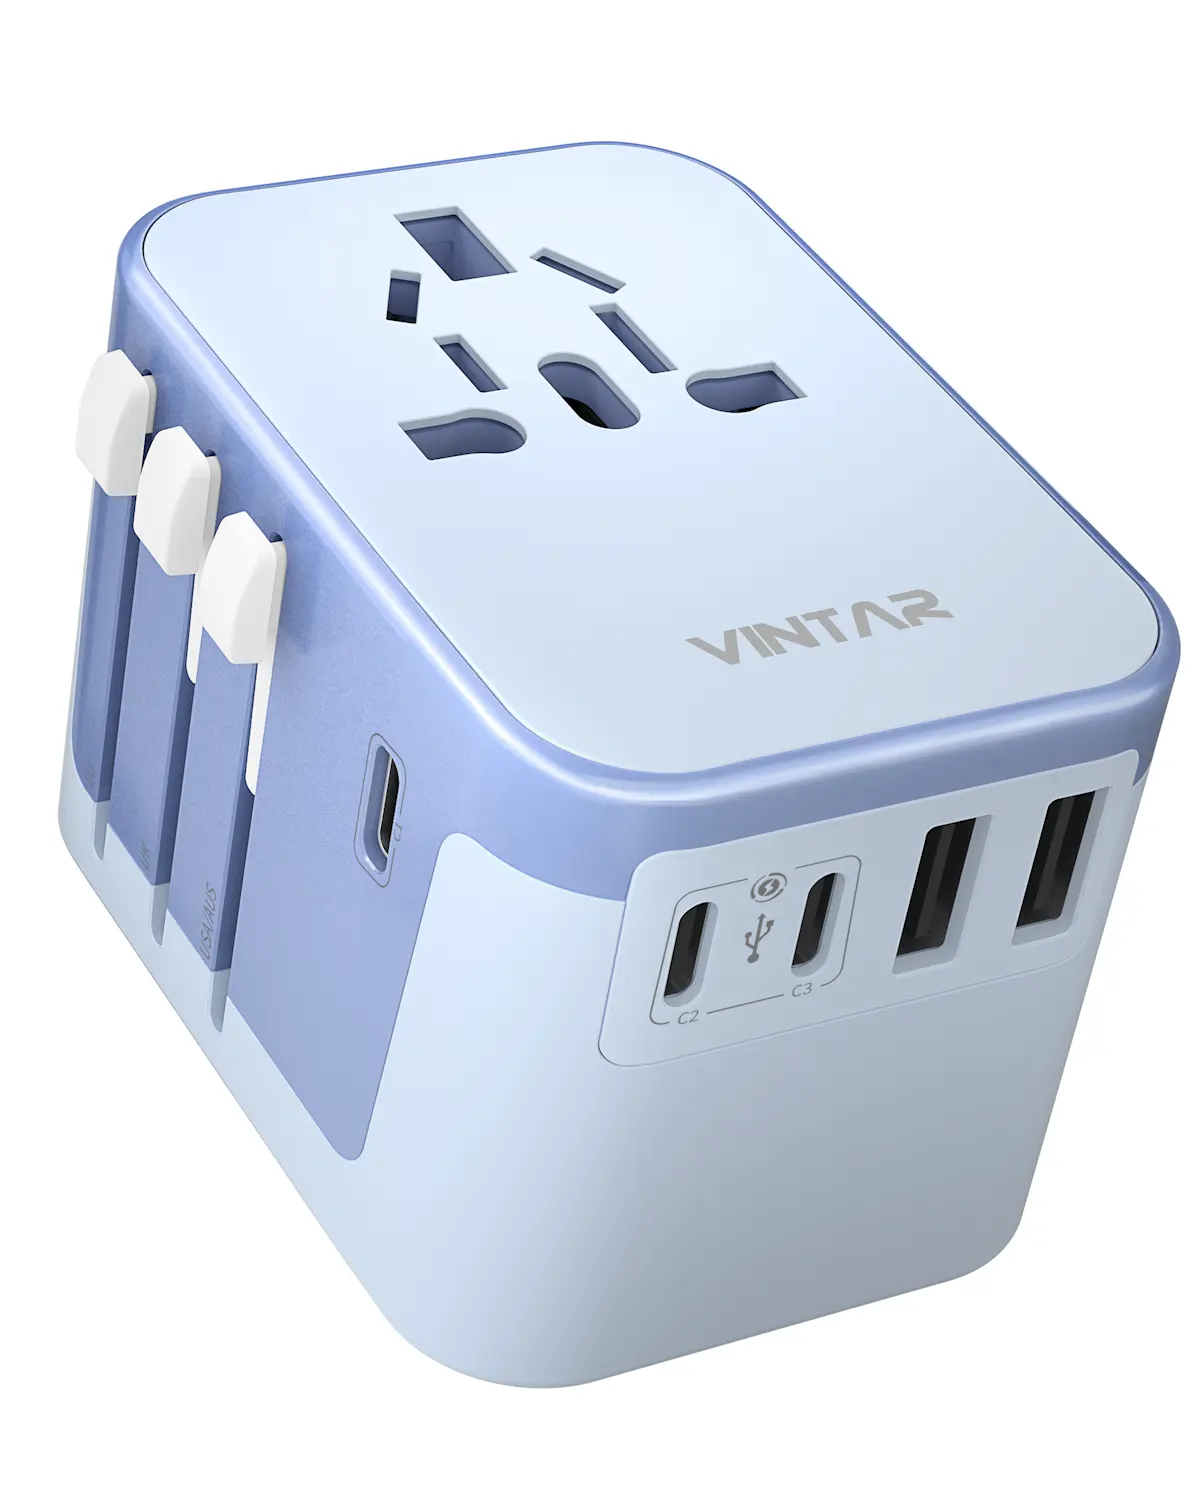 VINTAR universal travel charger power adapter socket EU AUS UK US plugs with 3 USB-C and 2 USB